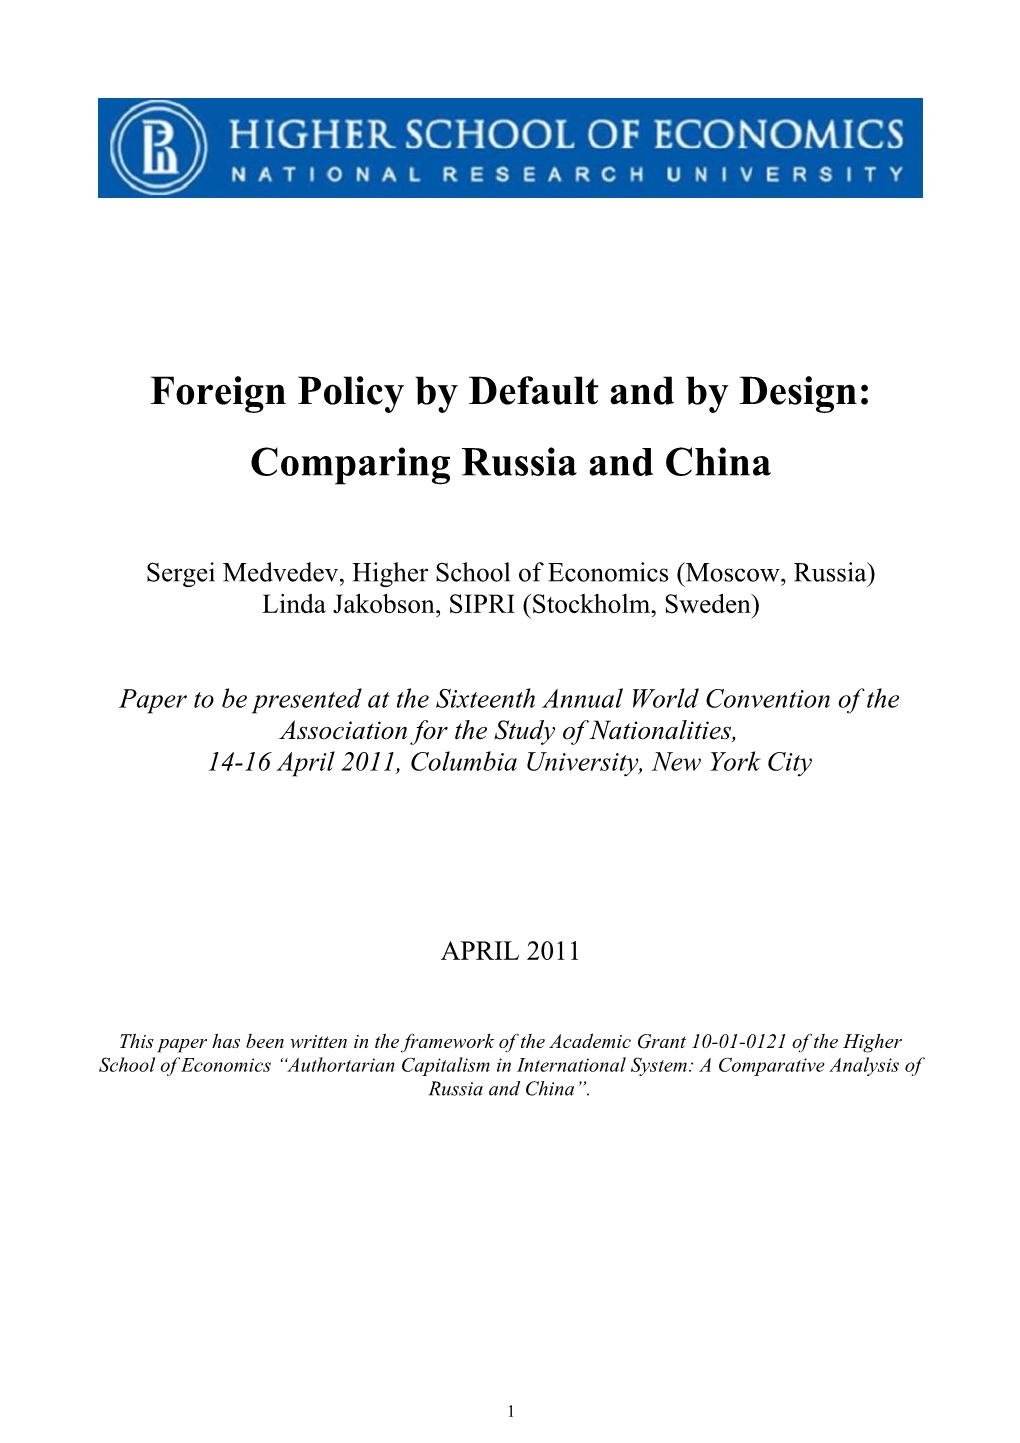 Foreign Policy by Design and by Default